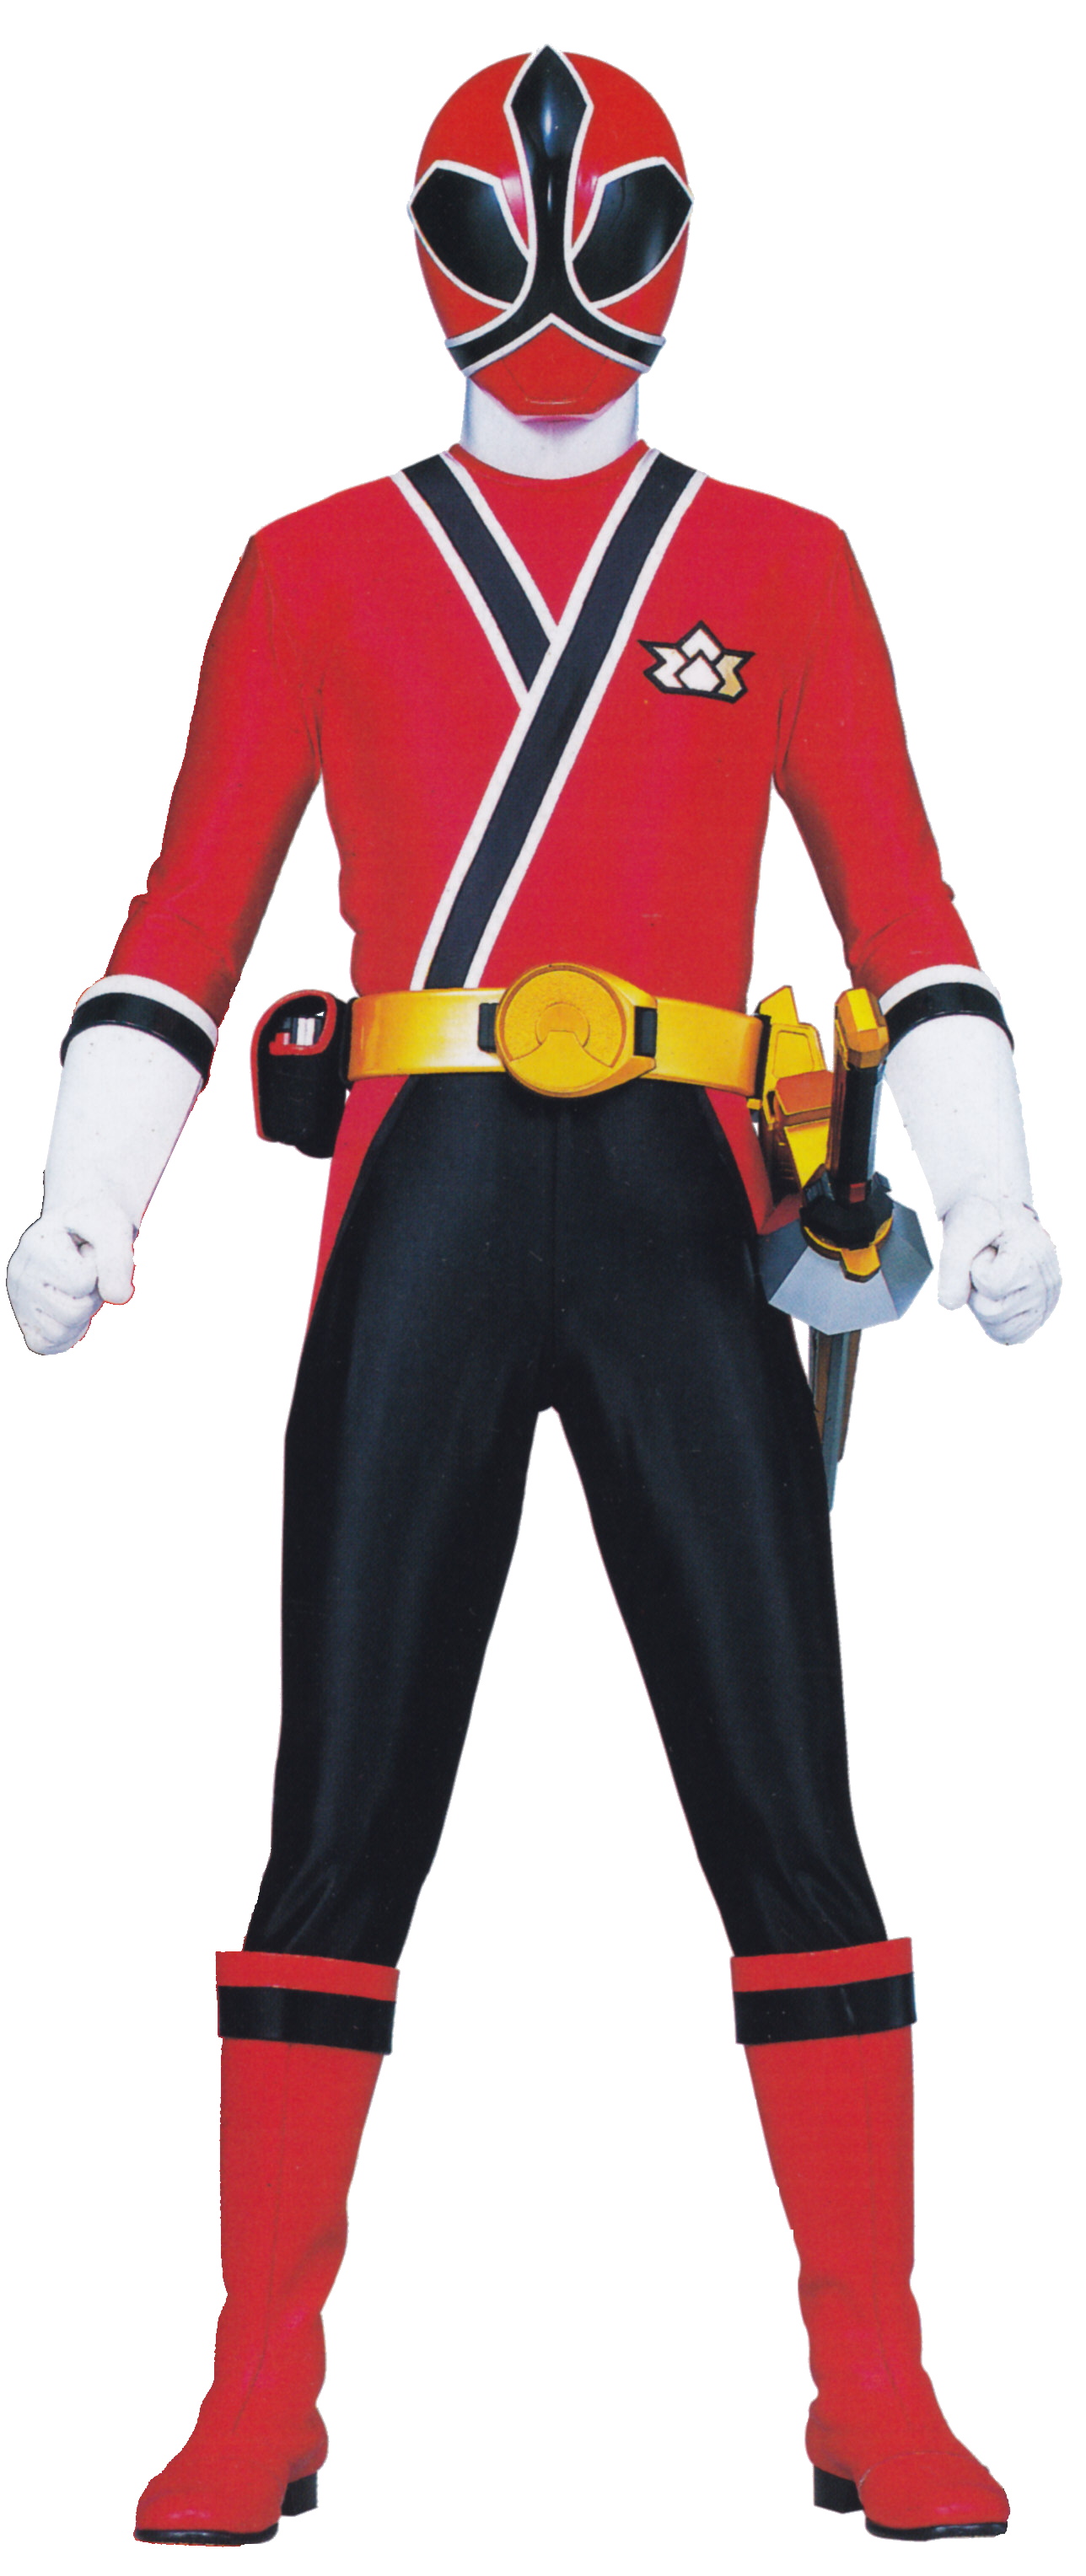 Mask clipart power ranger. I searched for rangers